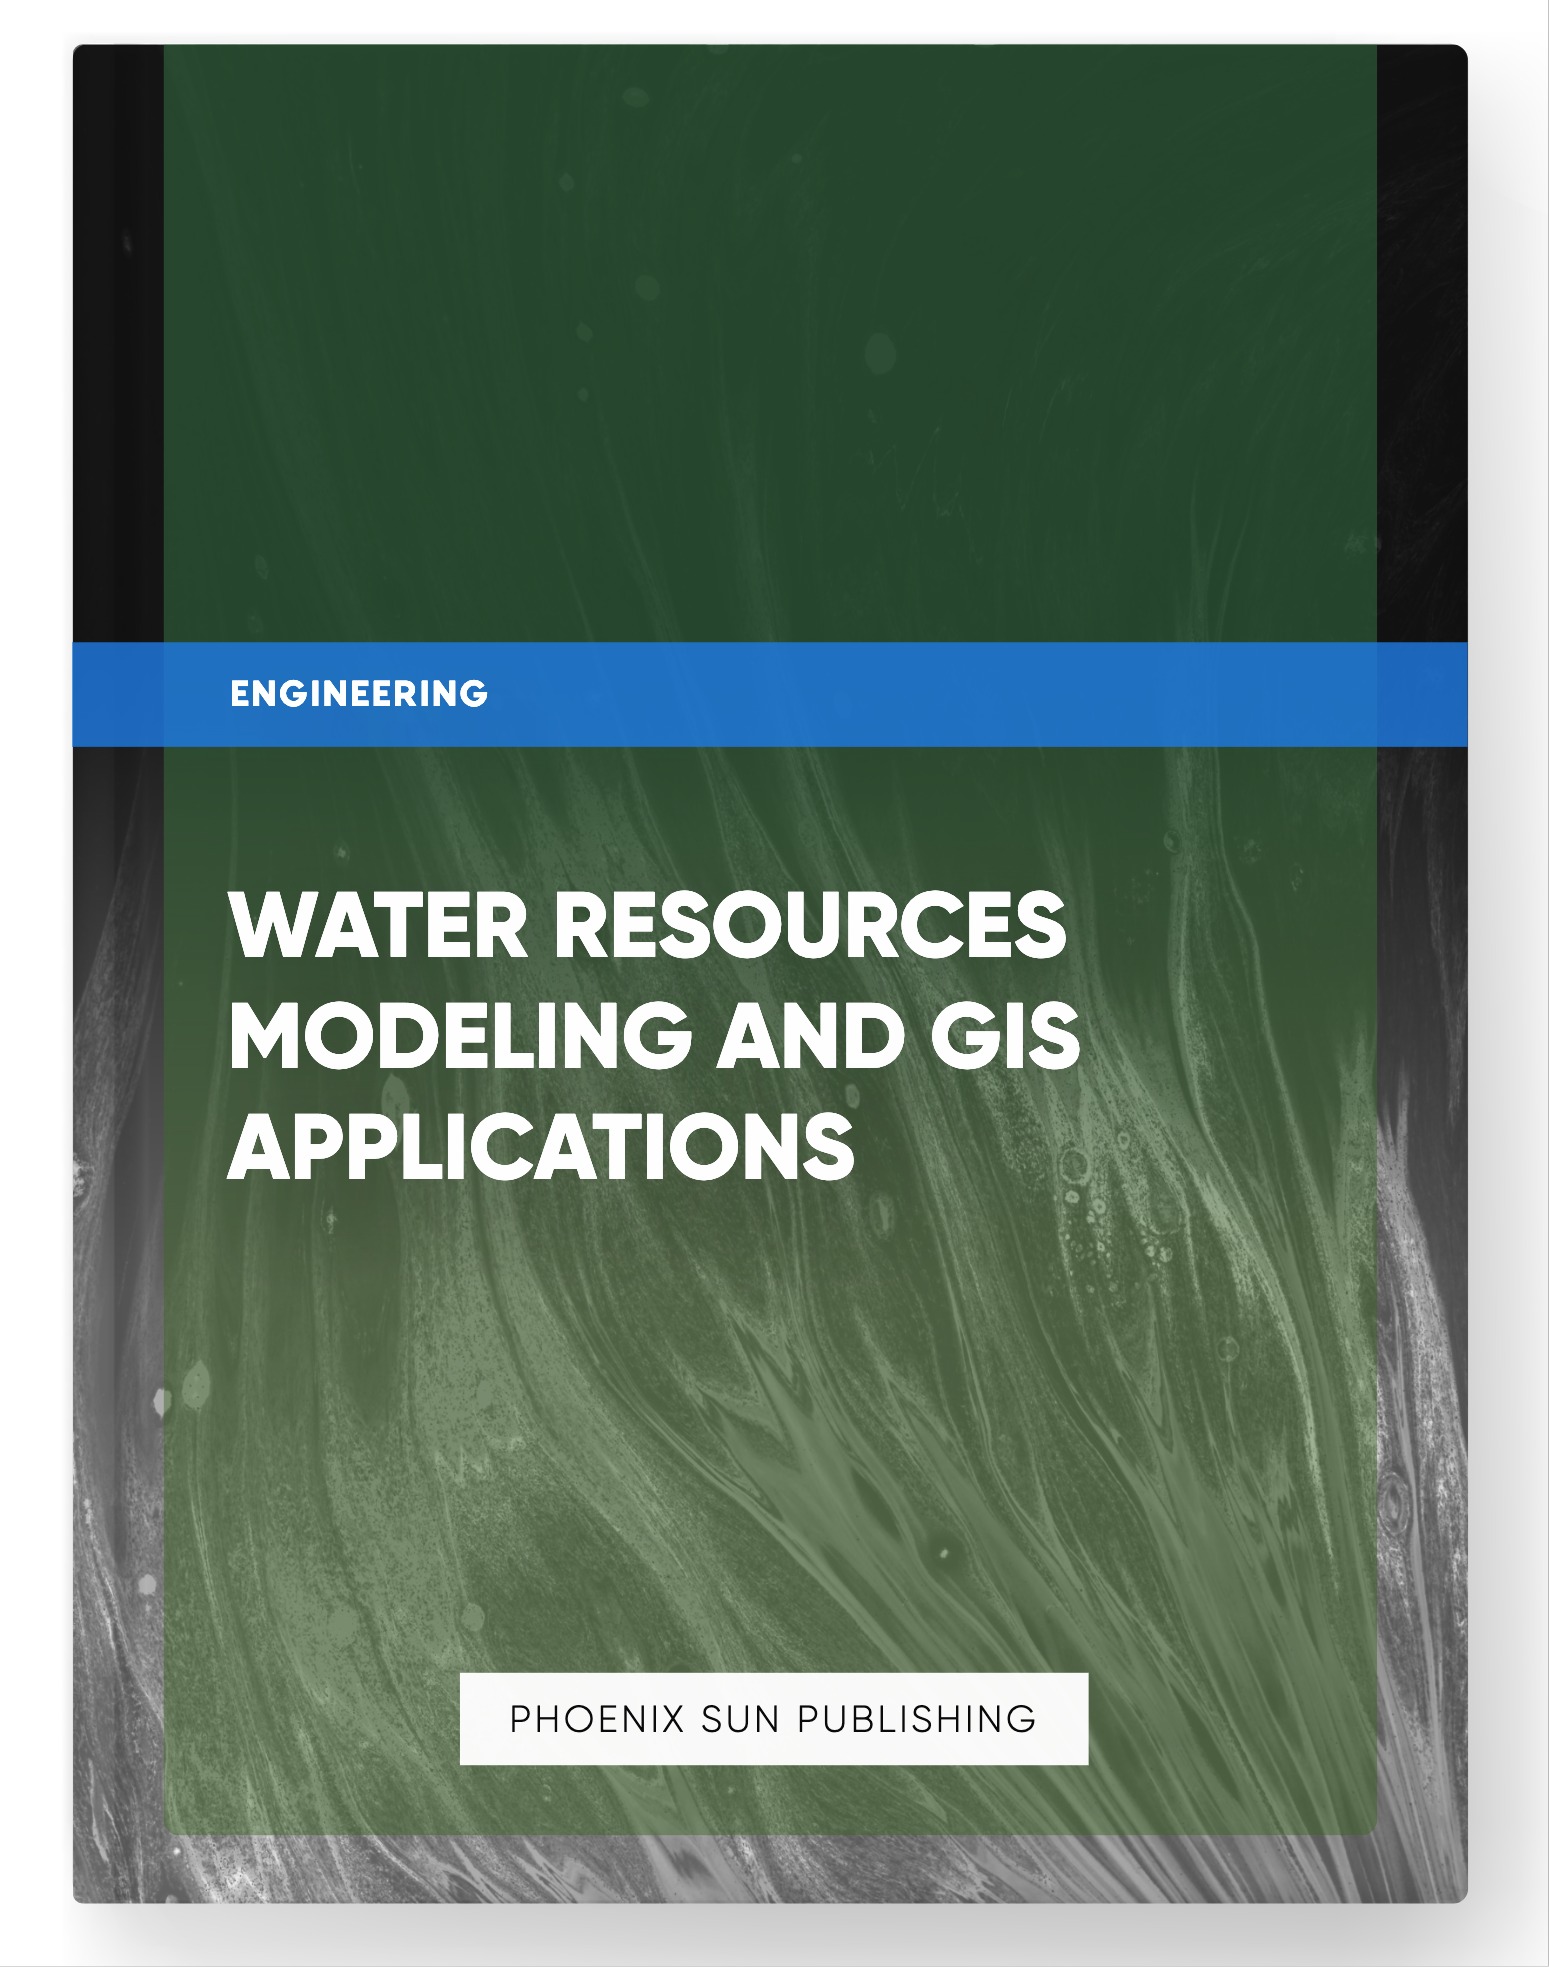 Water Resources Modeling and GIS Applications